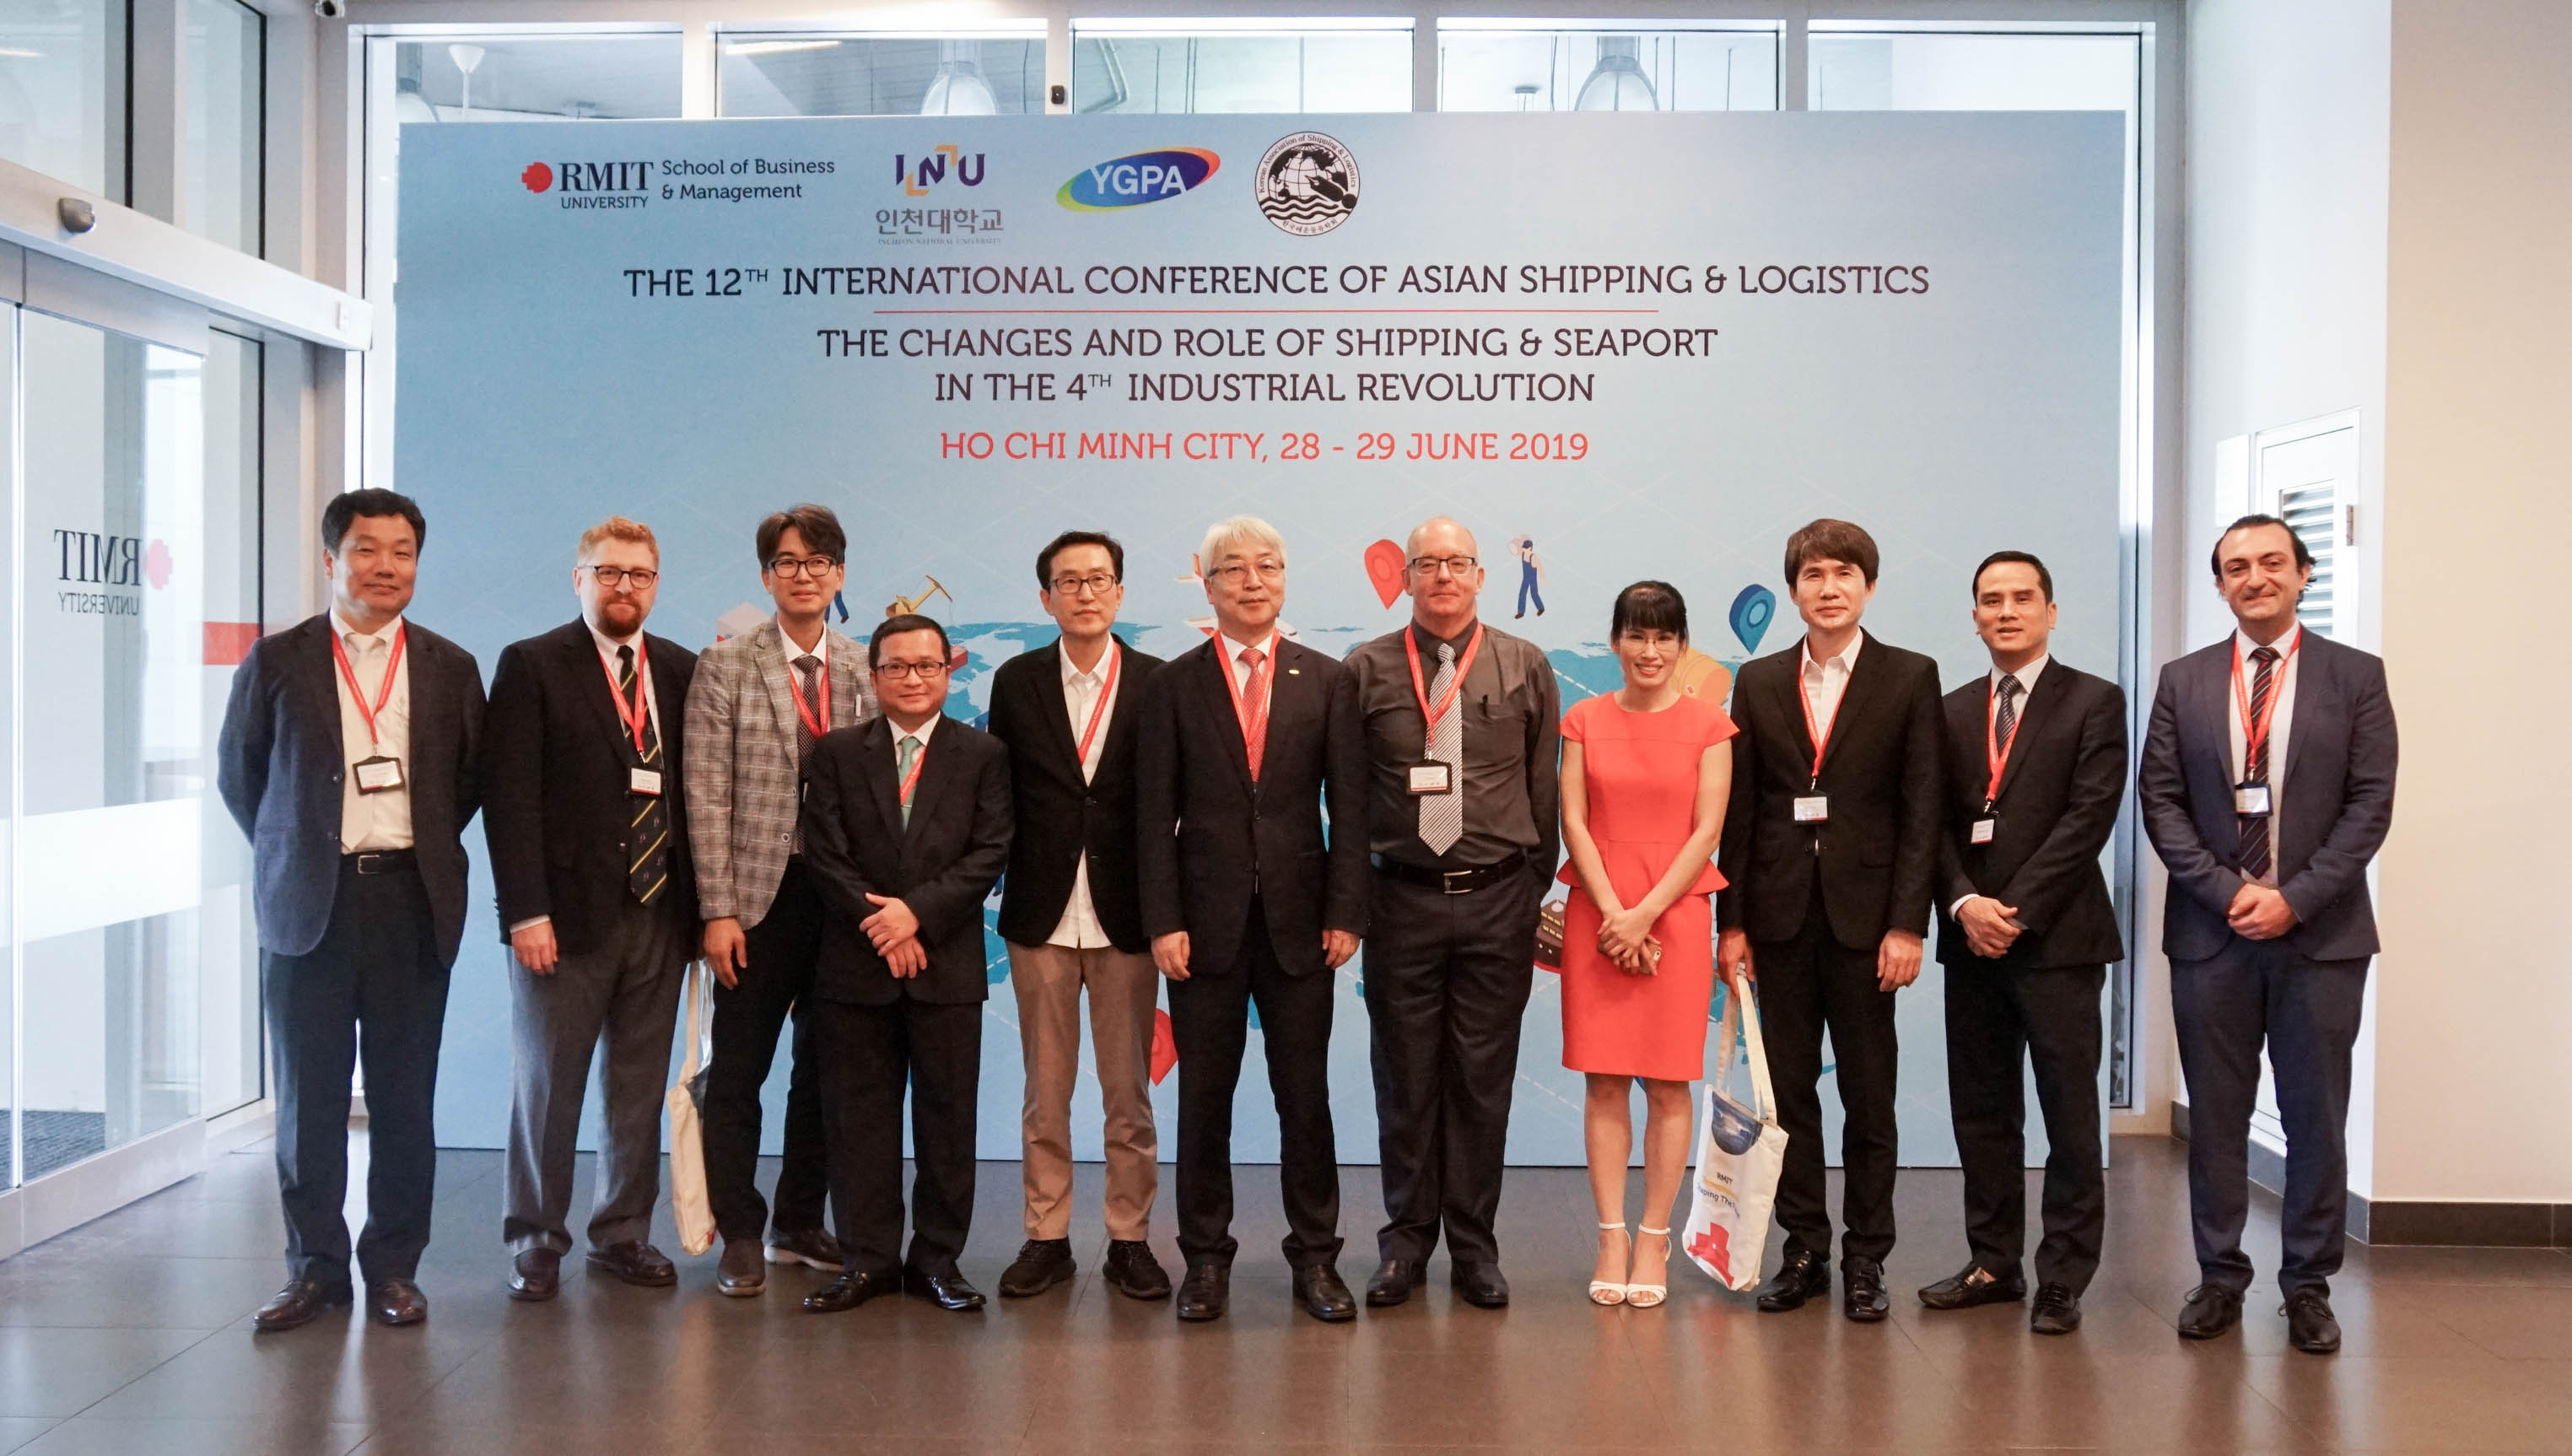 12th International Conference of Asian Shipping and Logistics discuss 29 different topics relating to the changes and role of shipping and seaports in the 4th Industrial Revolution. Photo: Prof. Dr. Tae-Won Chung, President of the Korea Association of Shipping and Logistics (3rd from left); Dr. Min Sik Cha, President of the Yeosu-Gwangyang Port Authority (6th from left); Prof. Ian Alexander Eddie, VinaCapital Professor of Private Equity, RMIT Vietnam (7th from left); Mr. Pham Huy Toan, Head of Vietnam Marin